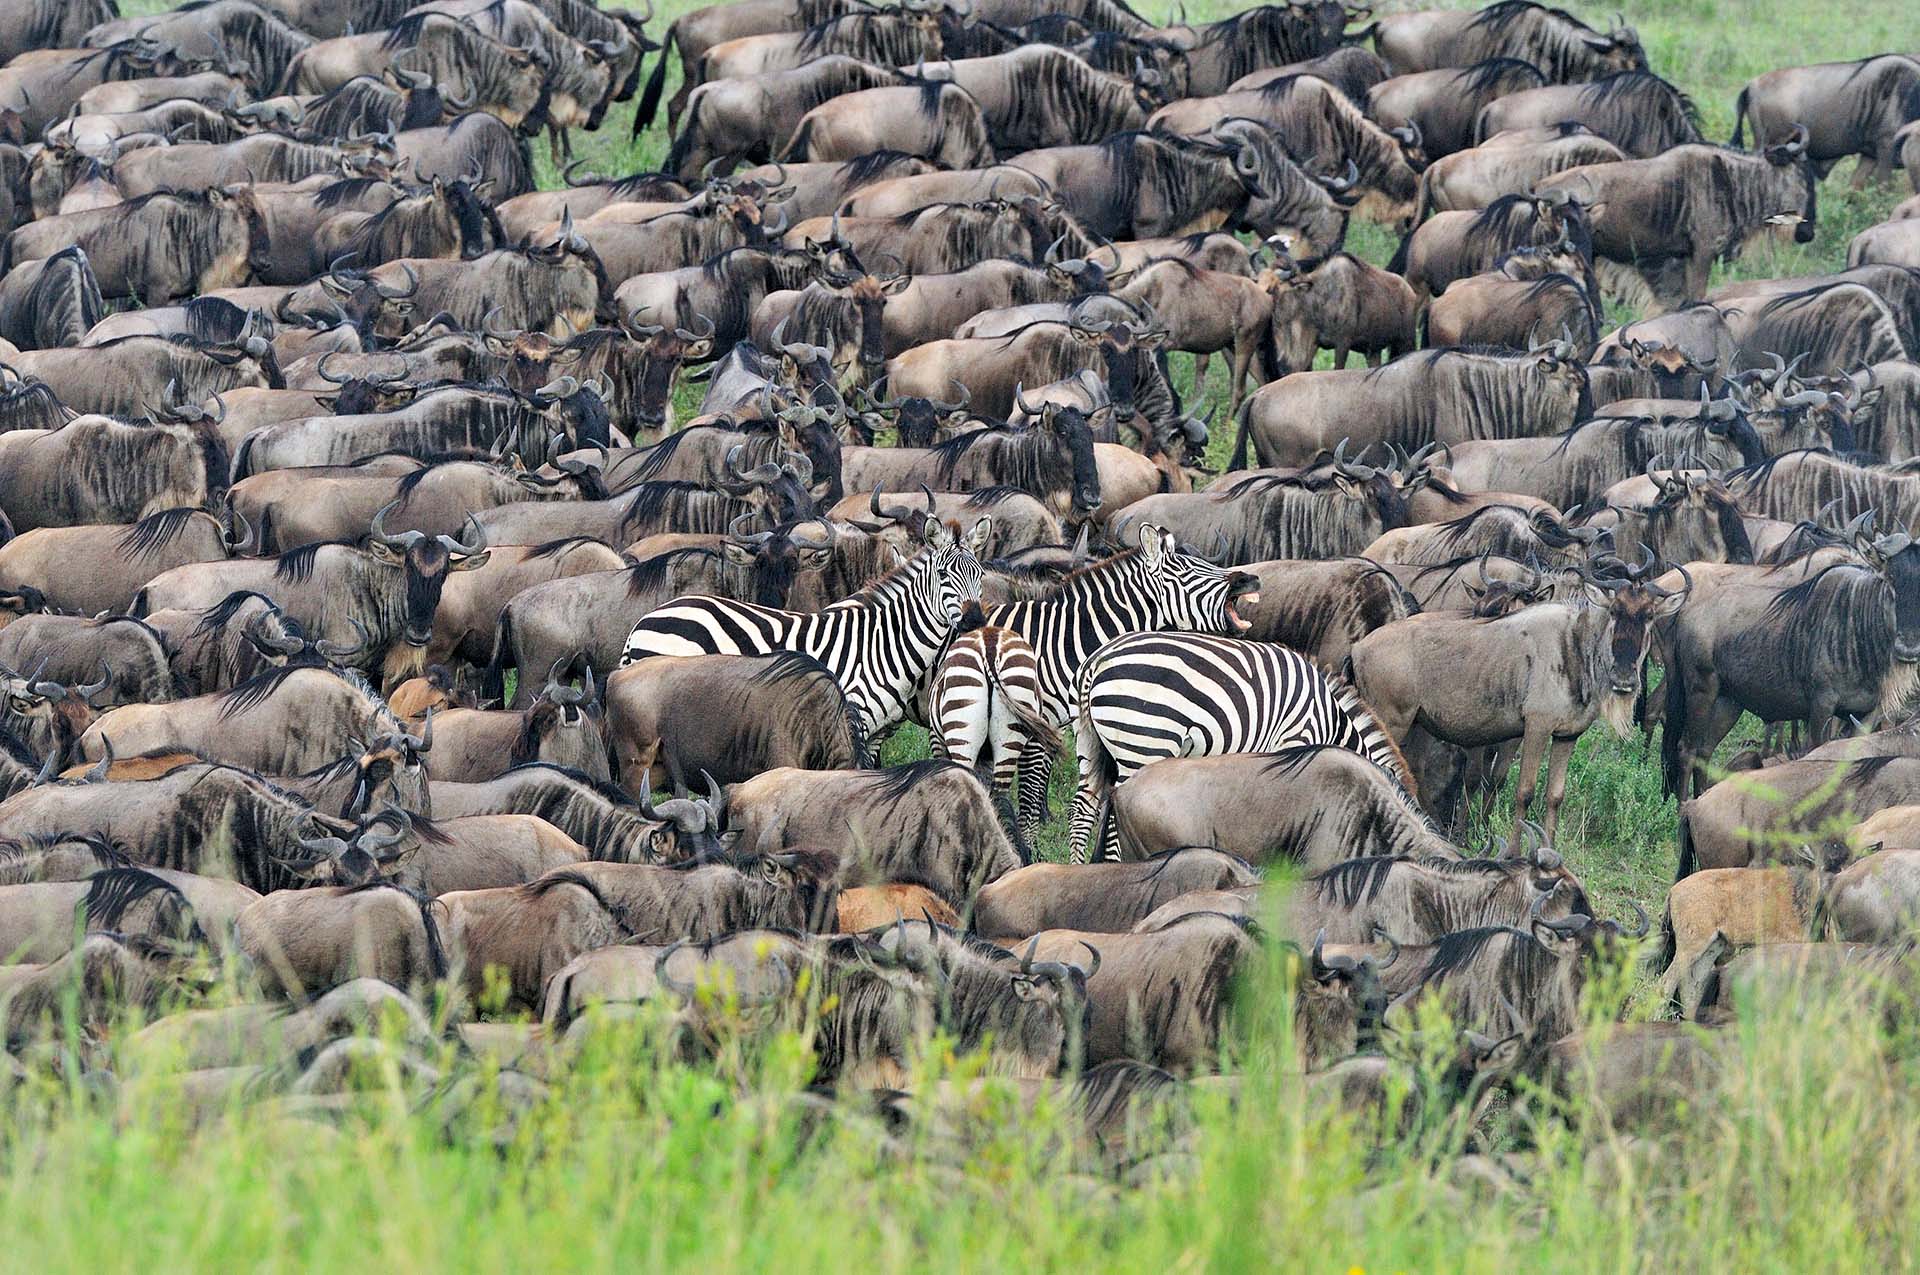 Wildebeest and zebra in tight group